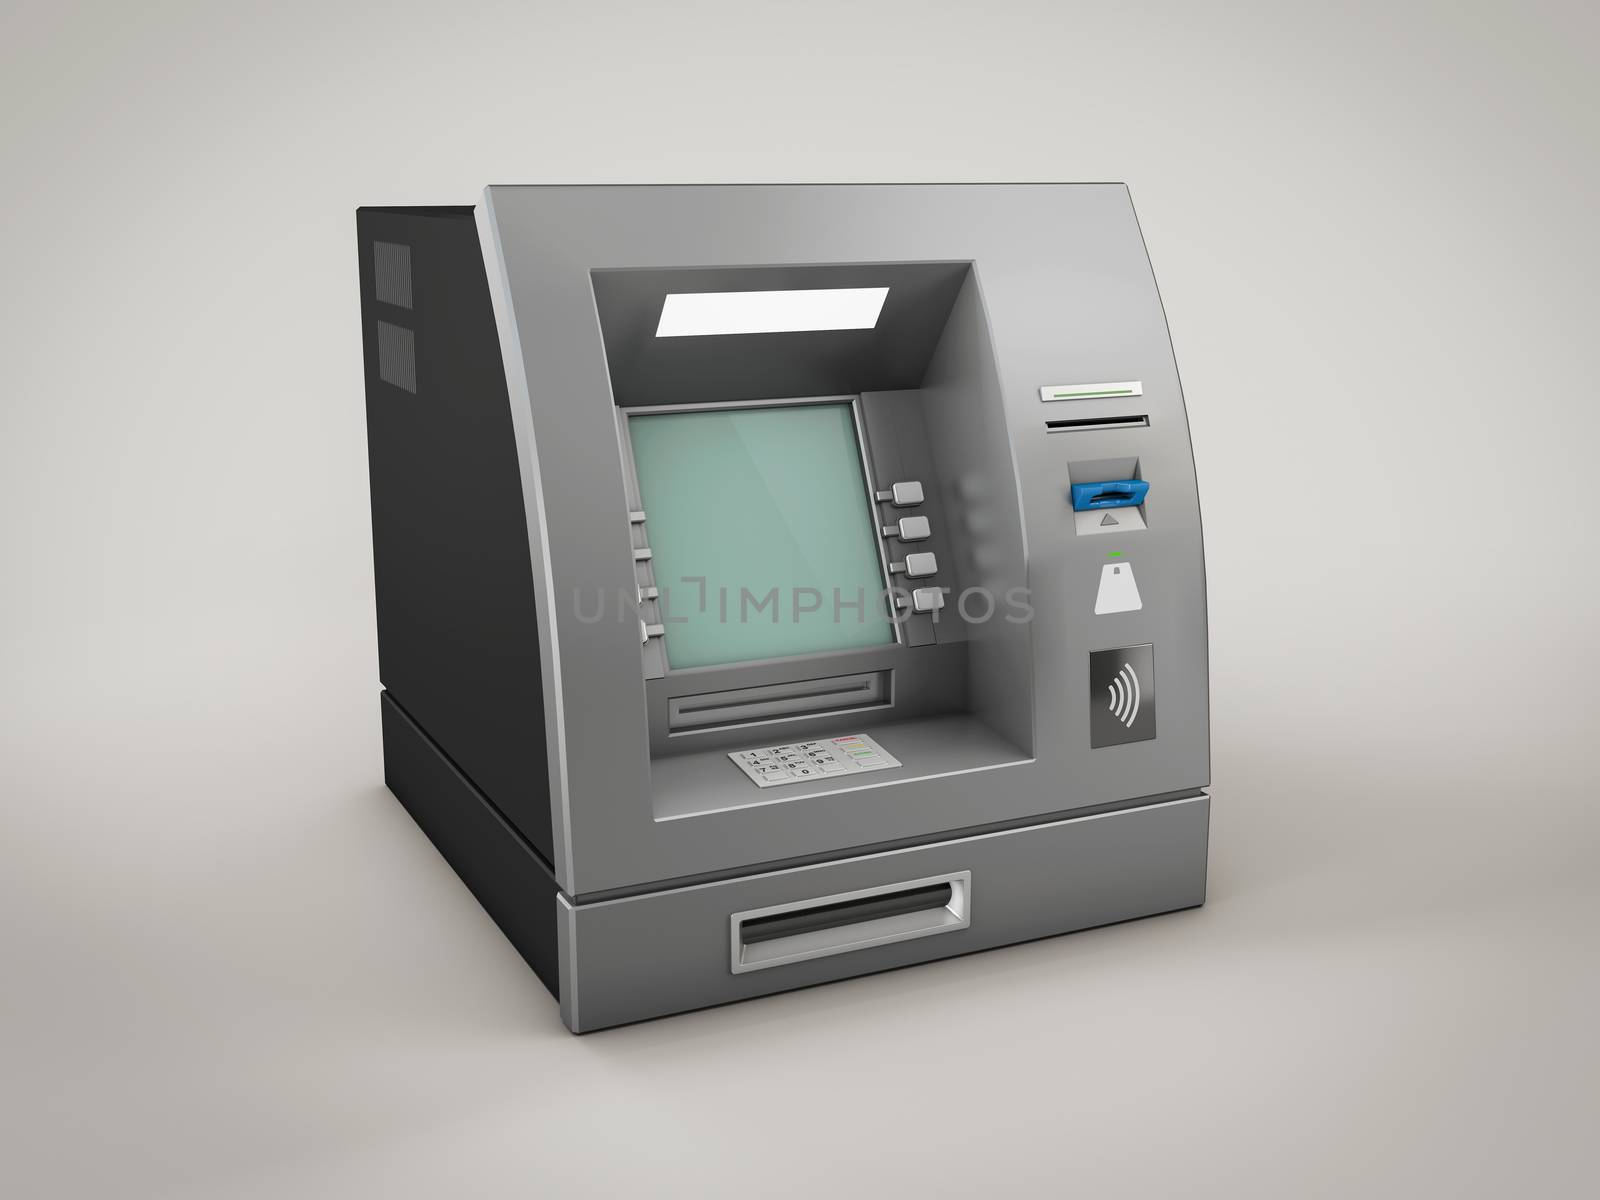 3d rendering of ATM Bank Cash Machine, clipping path included by tussik